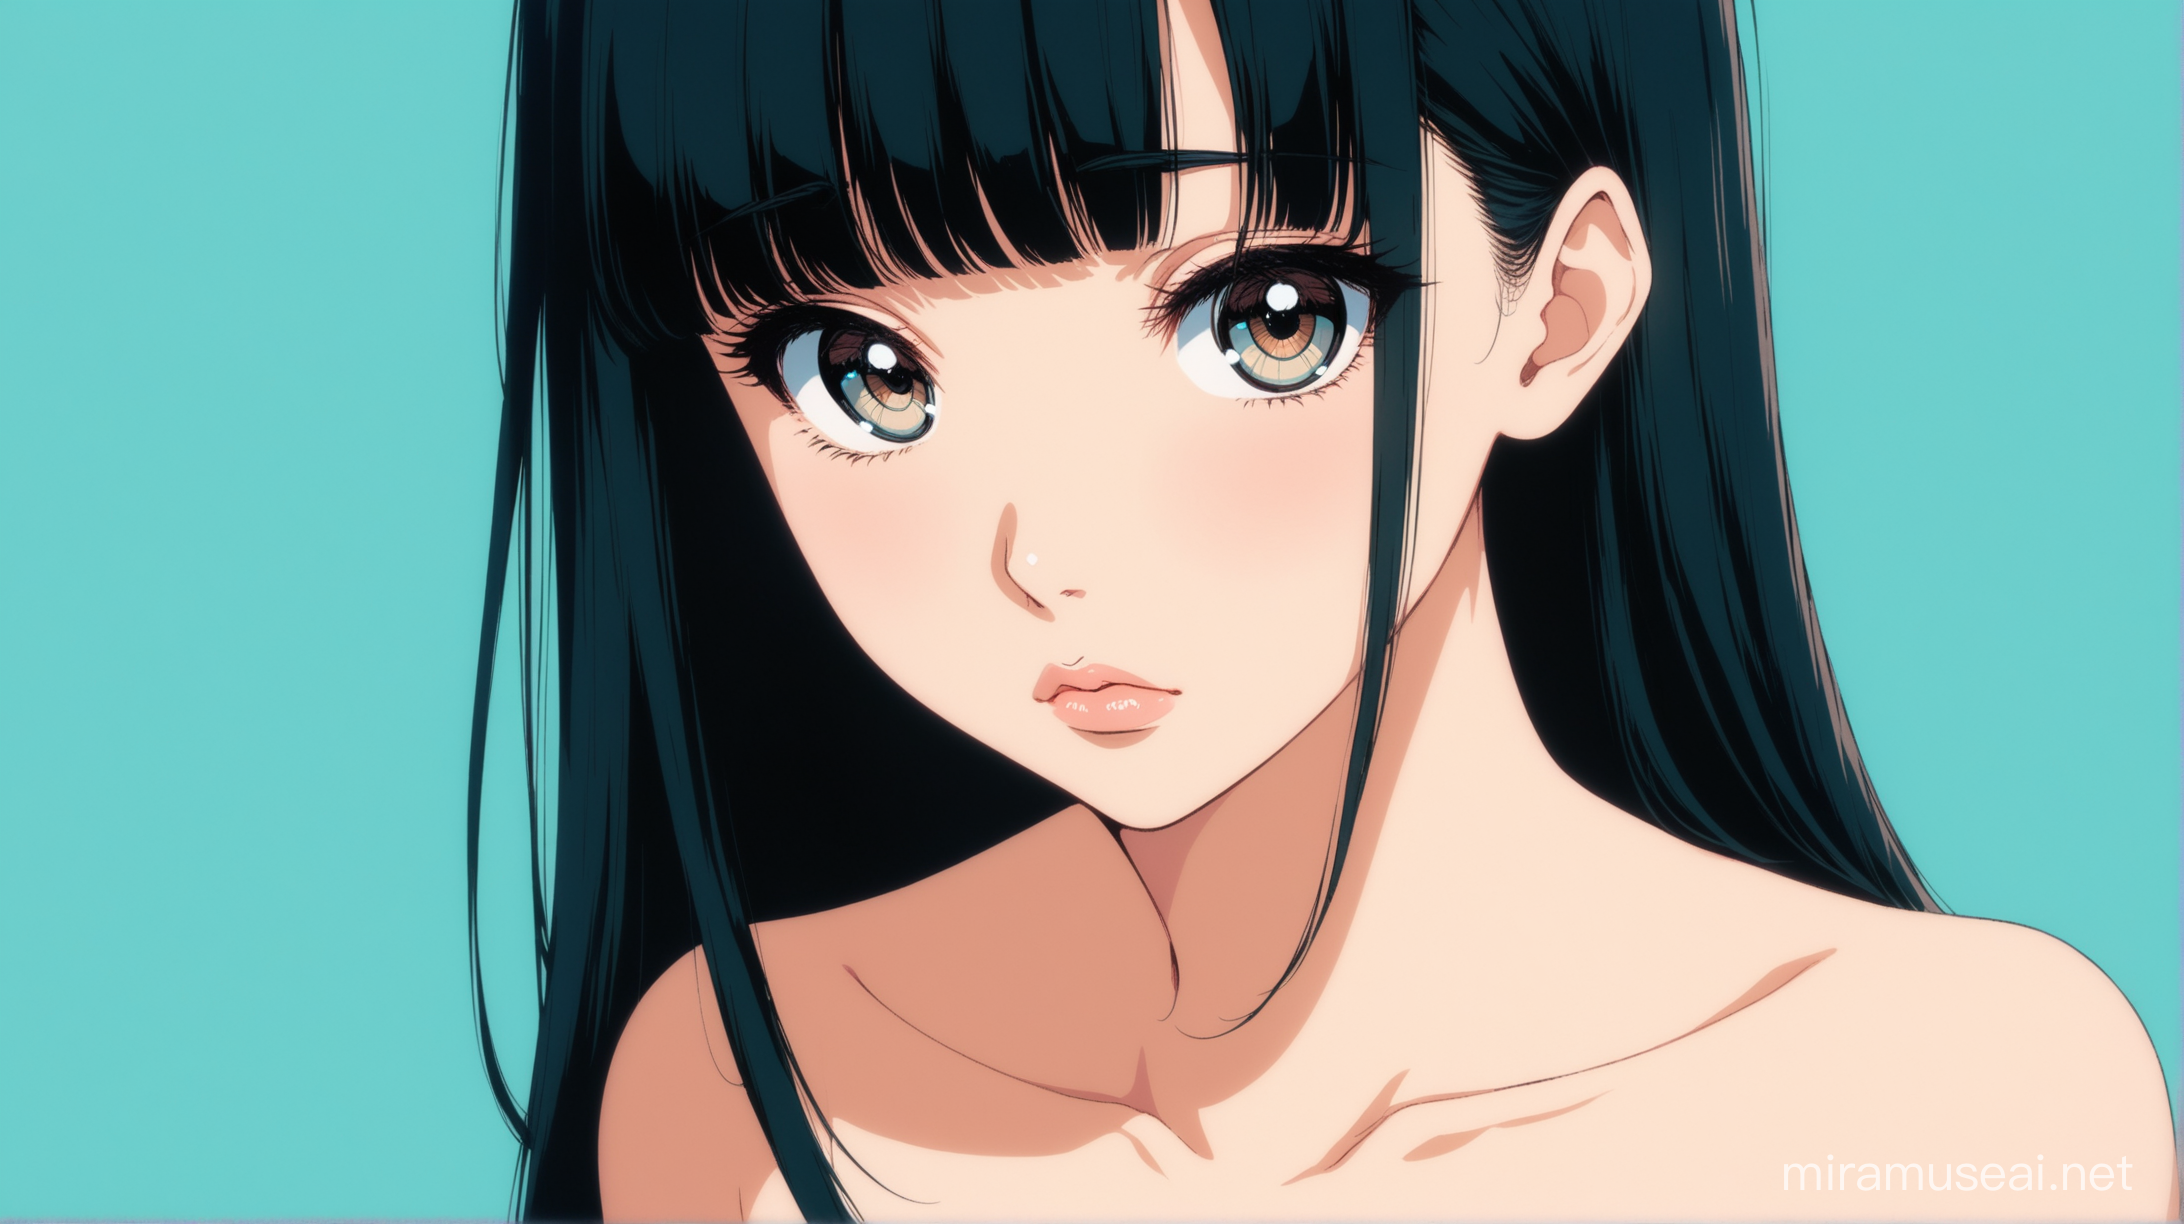 woman with modest chest looking under her eyelashes, dark brown eyes, long black hair behind her shoulders parted in the middle with blunt bangs, body facing straight forward with head tilted down to the left looking down at the bottom left, large anime eyes, nude glossy full lips slightly parted, wearing plain white shirt, anime style, pastel blue wall background, retro 90s anime look